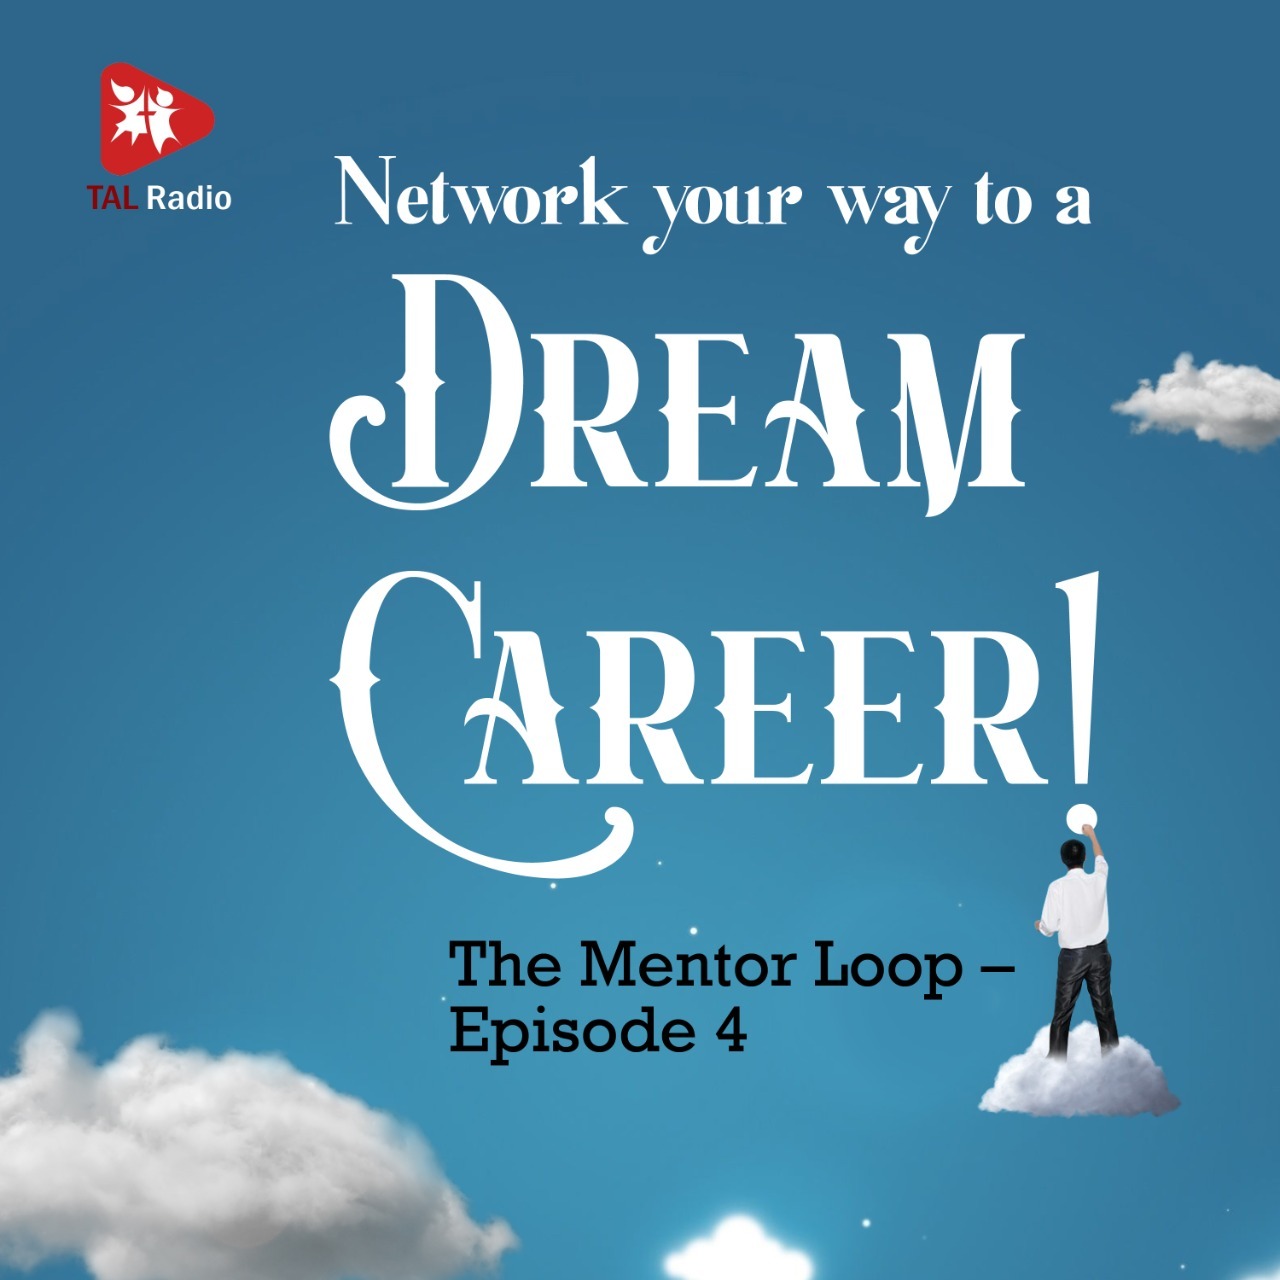 Network your way to a dream career!